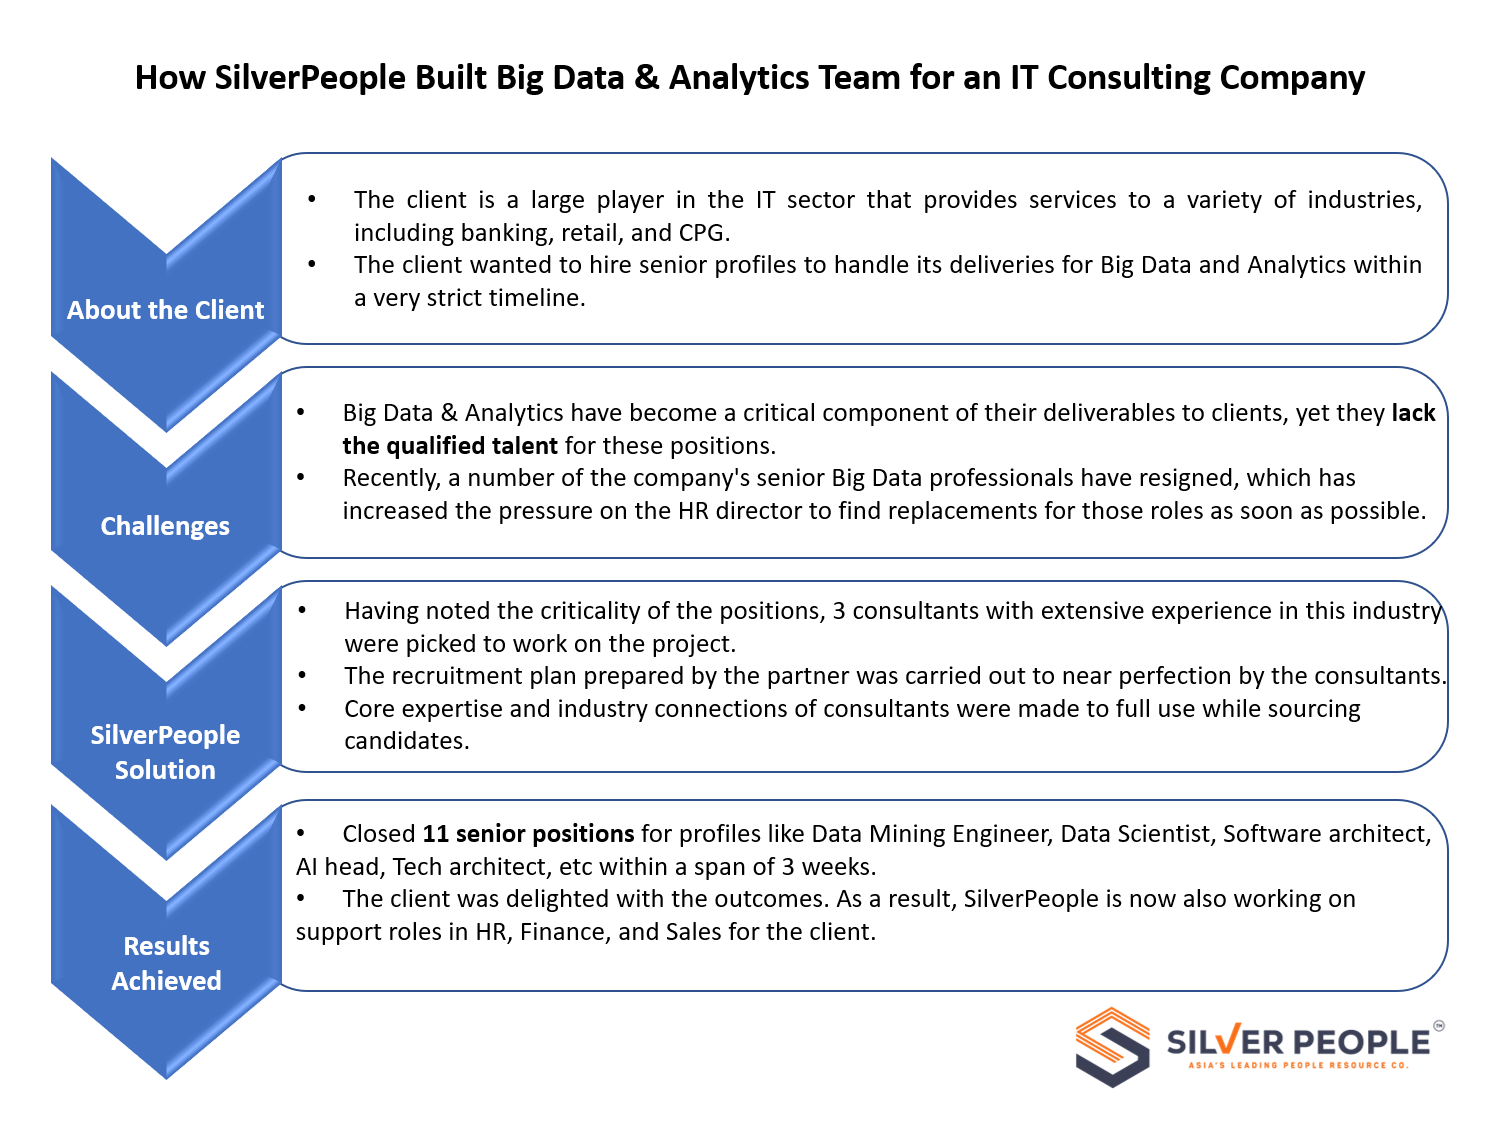 How SilverPeople Built Big Data & Analytics Team for an IT Consulting Company